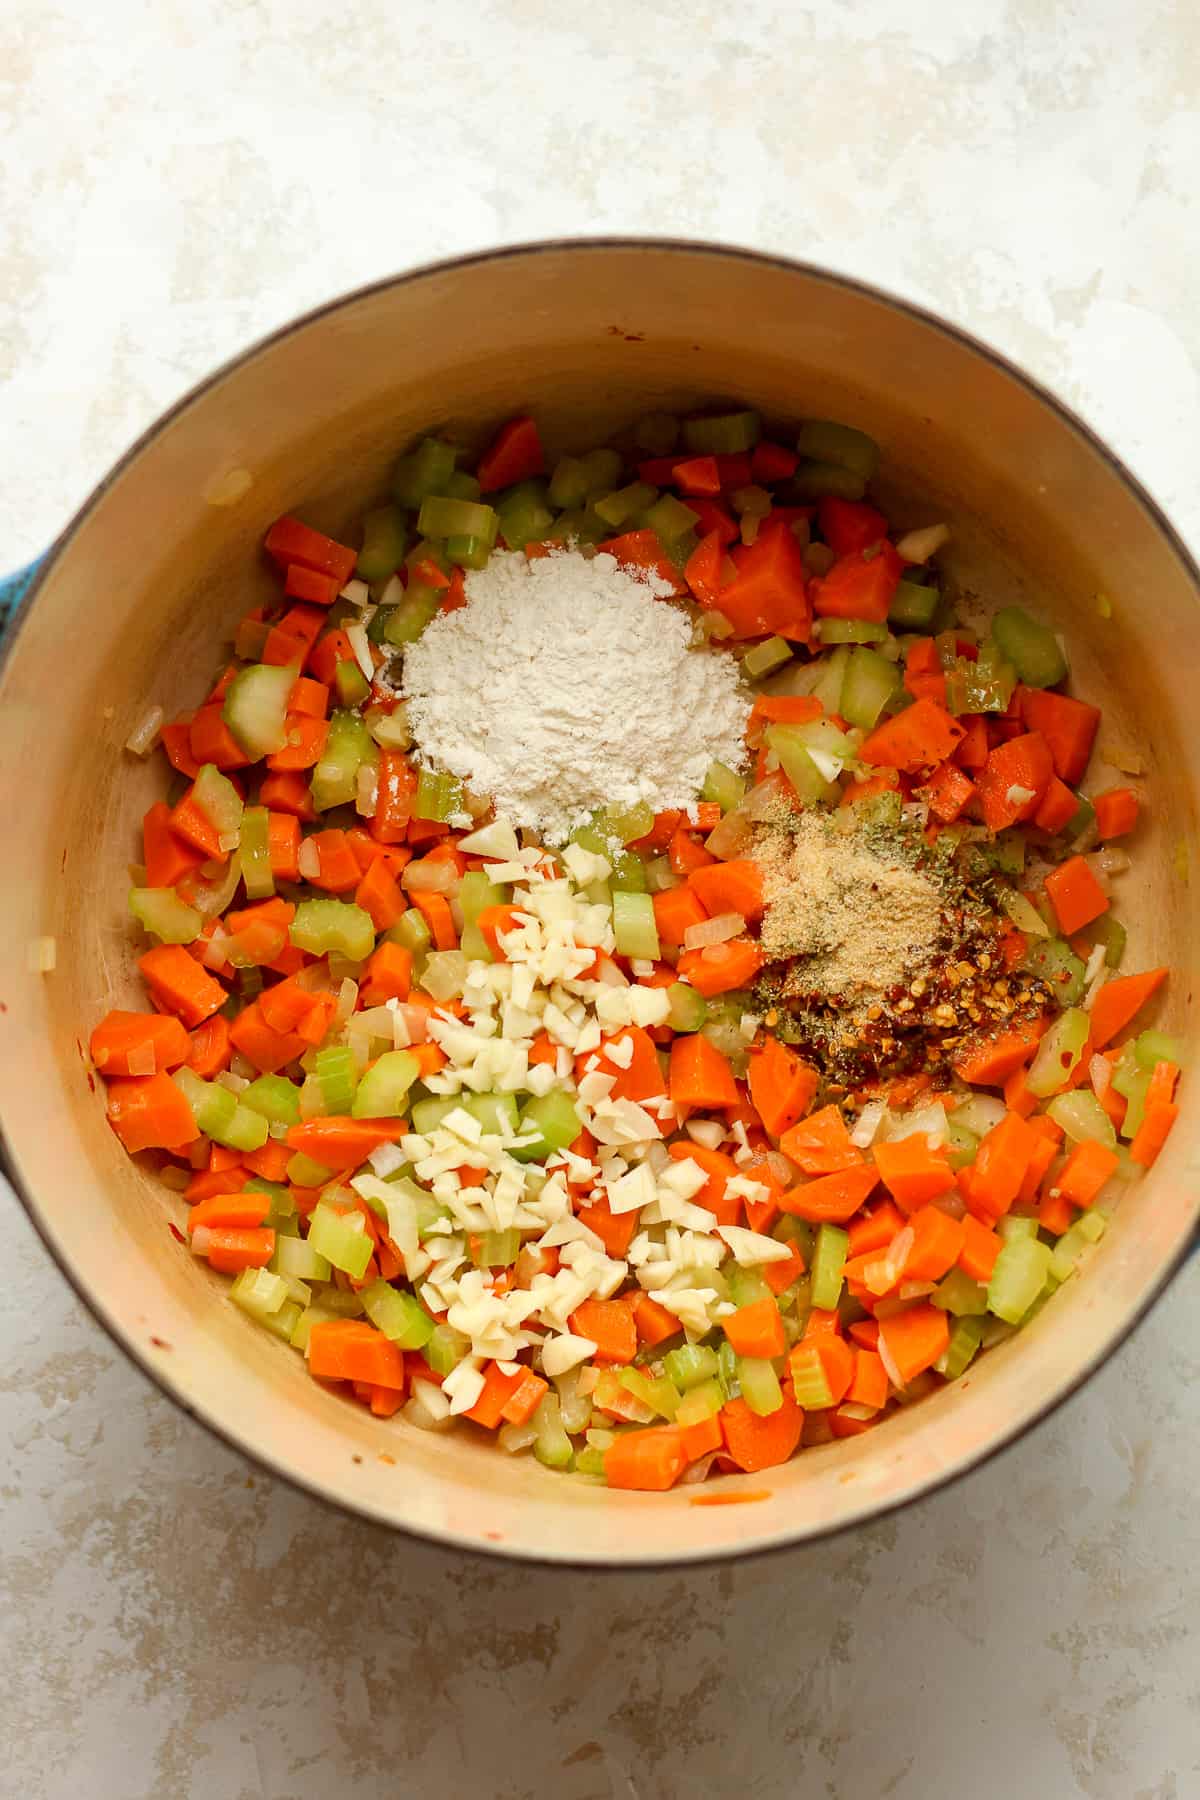 A pot of the diced veggies with minced garlic, seasonings, and flour on top.